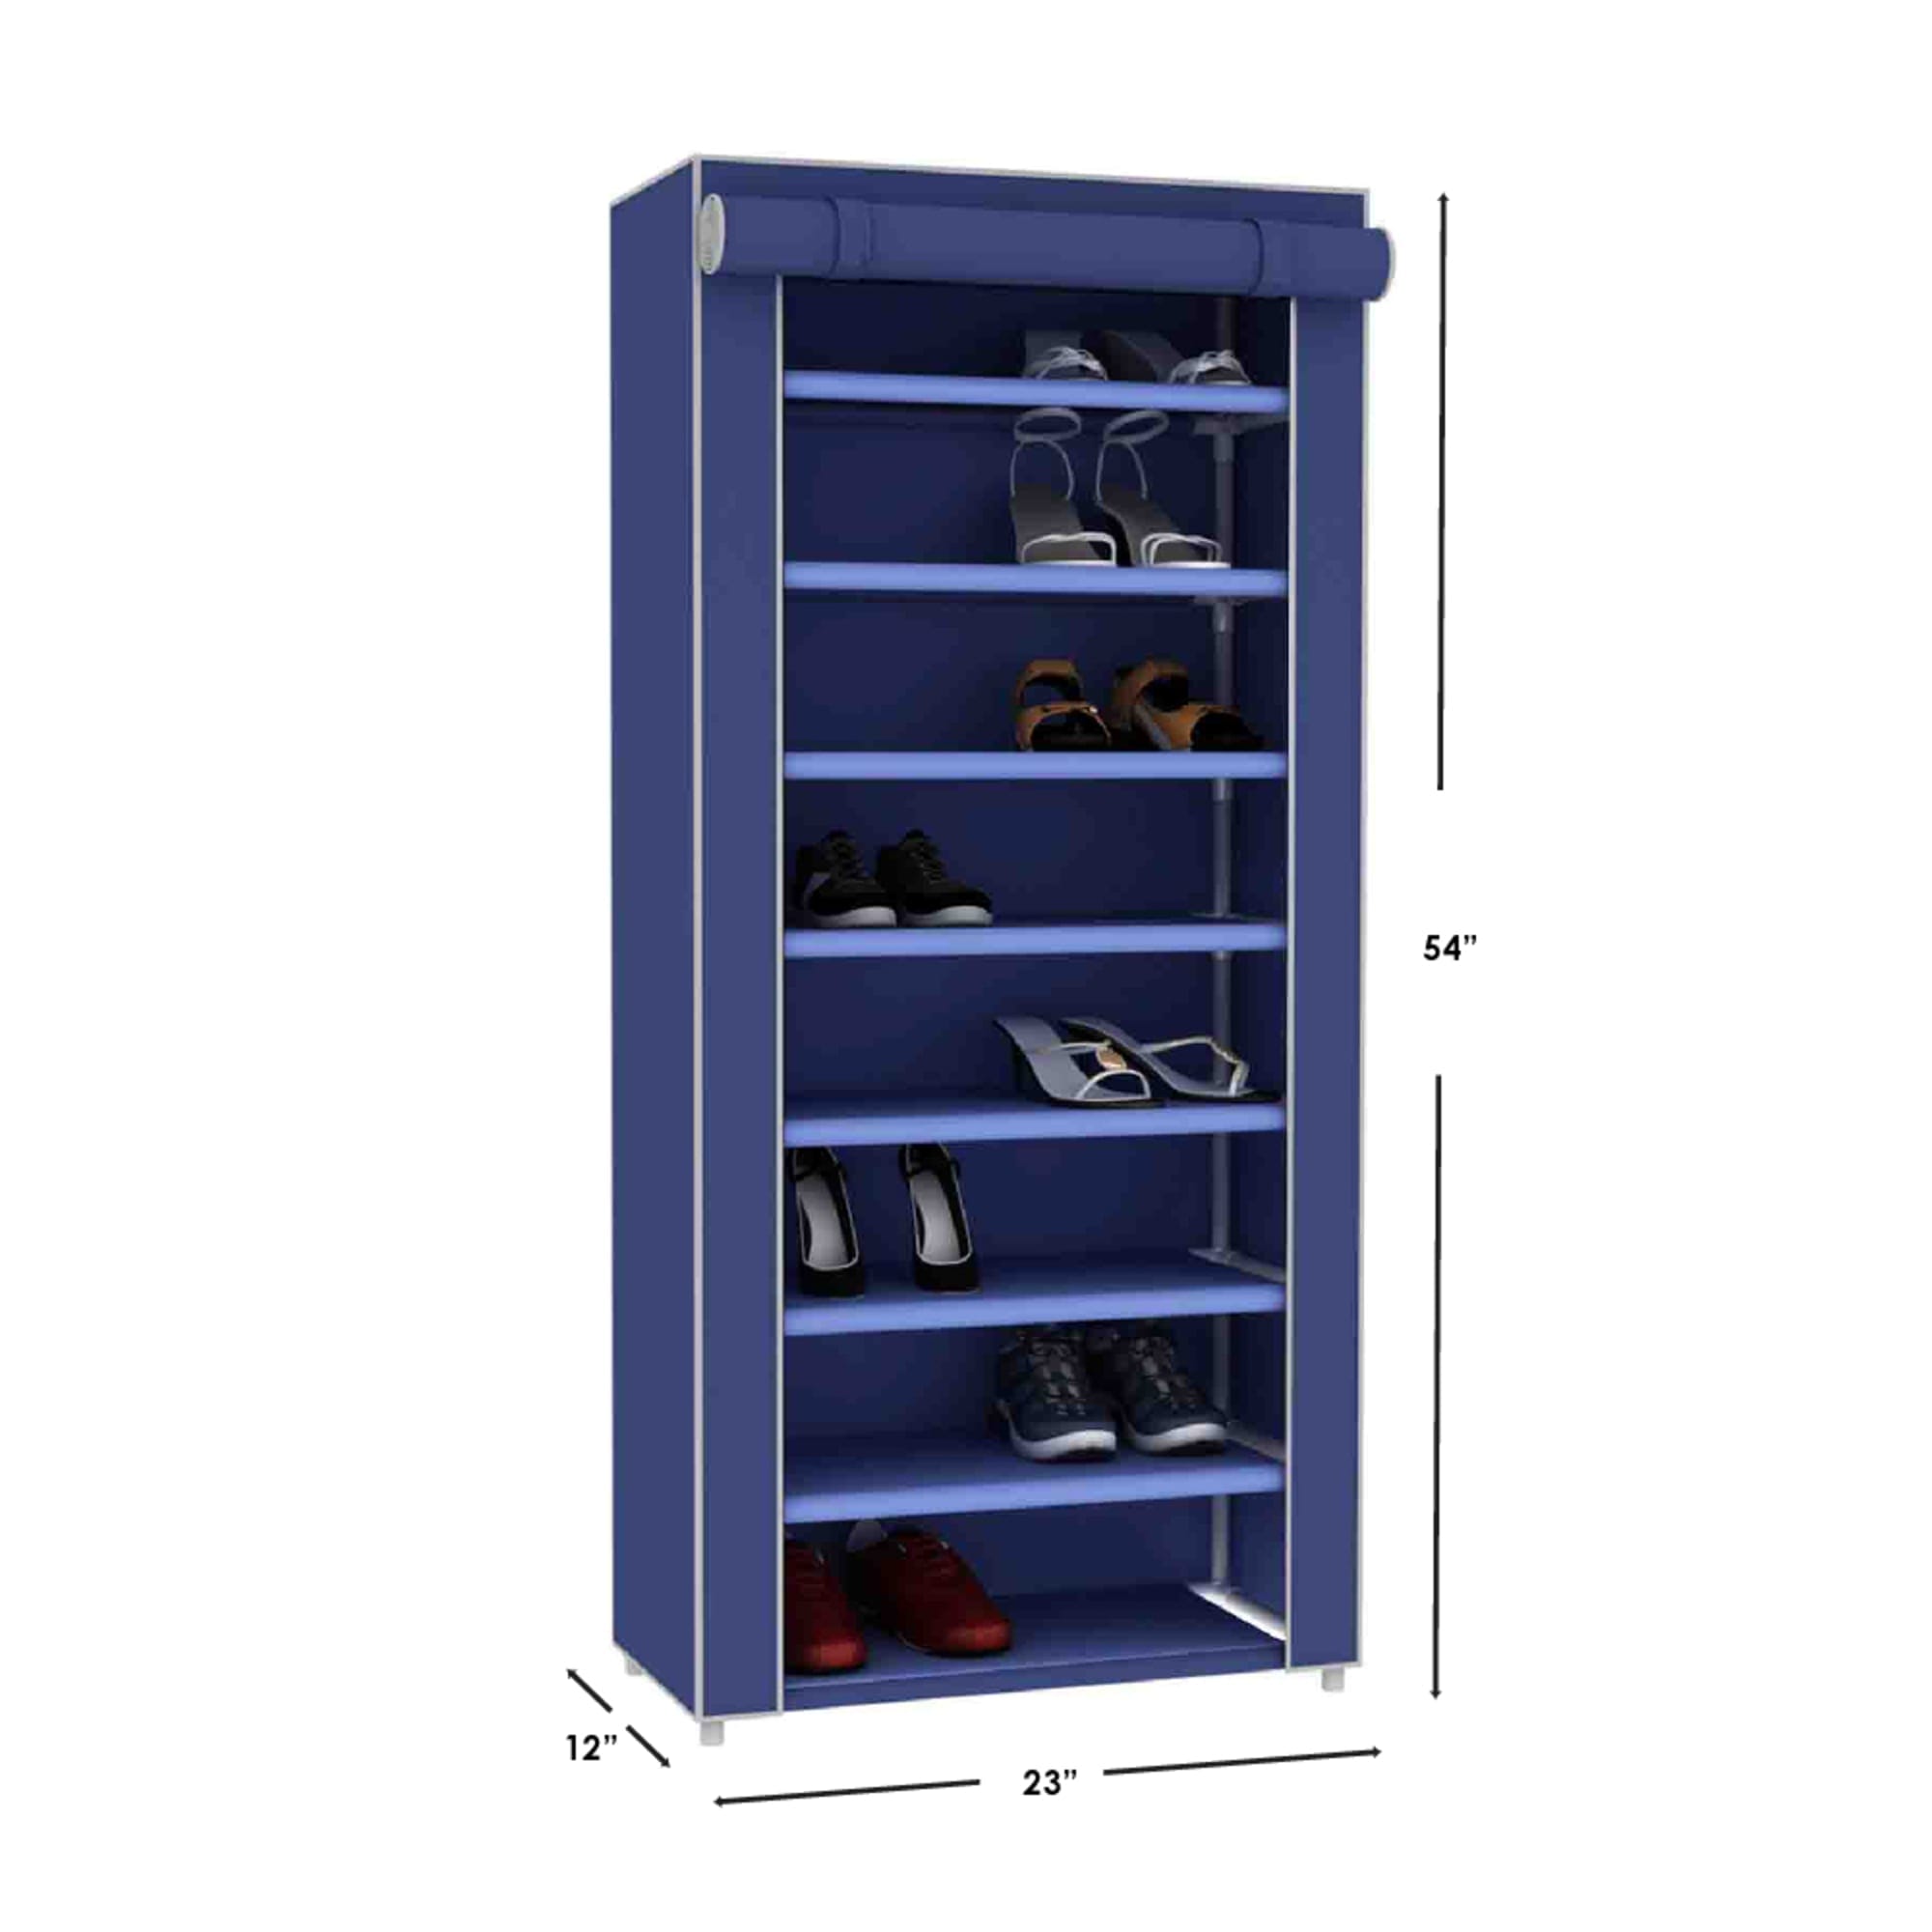 Home Basics 8-Tier Portable Polyester Shoe Closet, Navy $20.00 EACH, CASE PACK OF 5